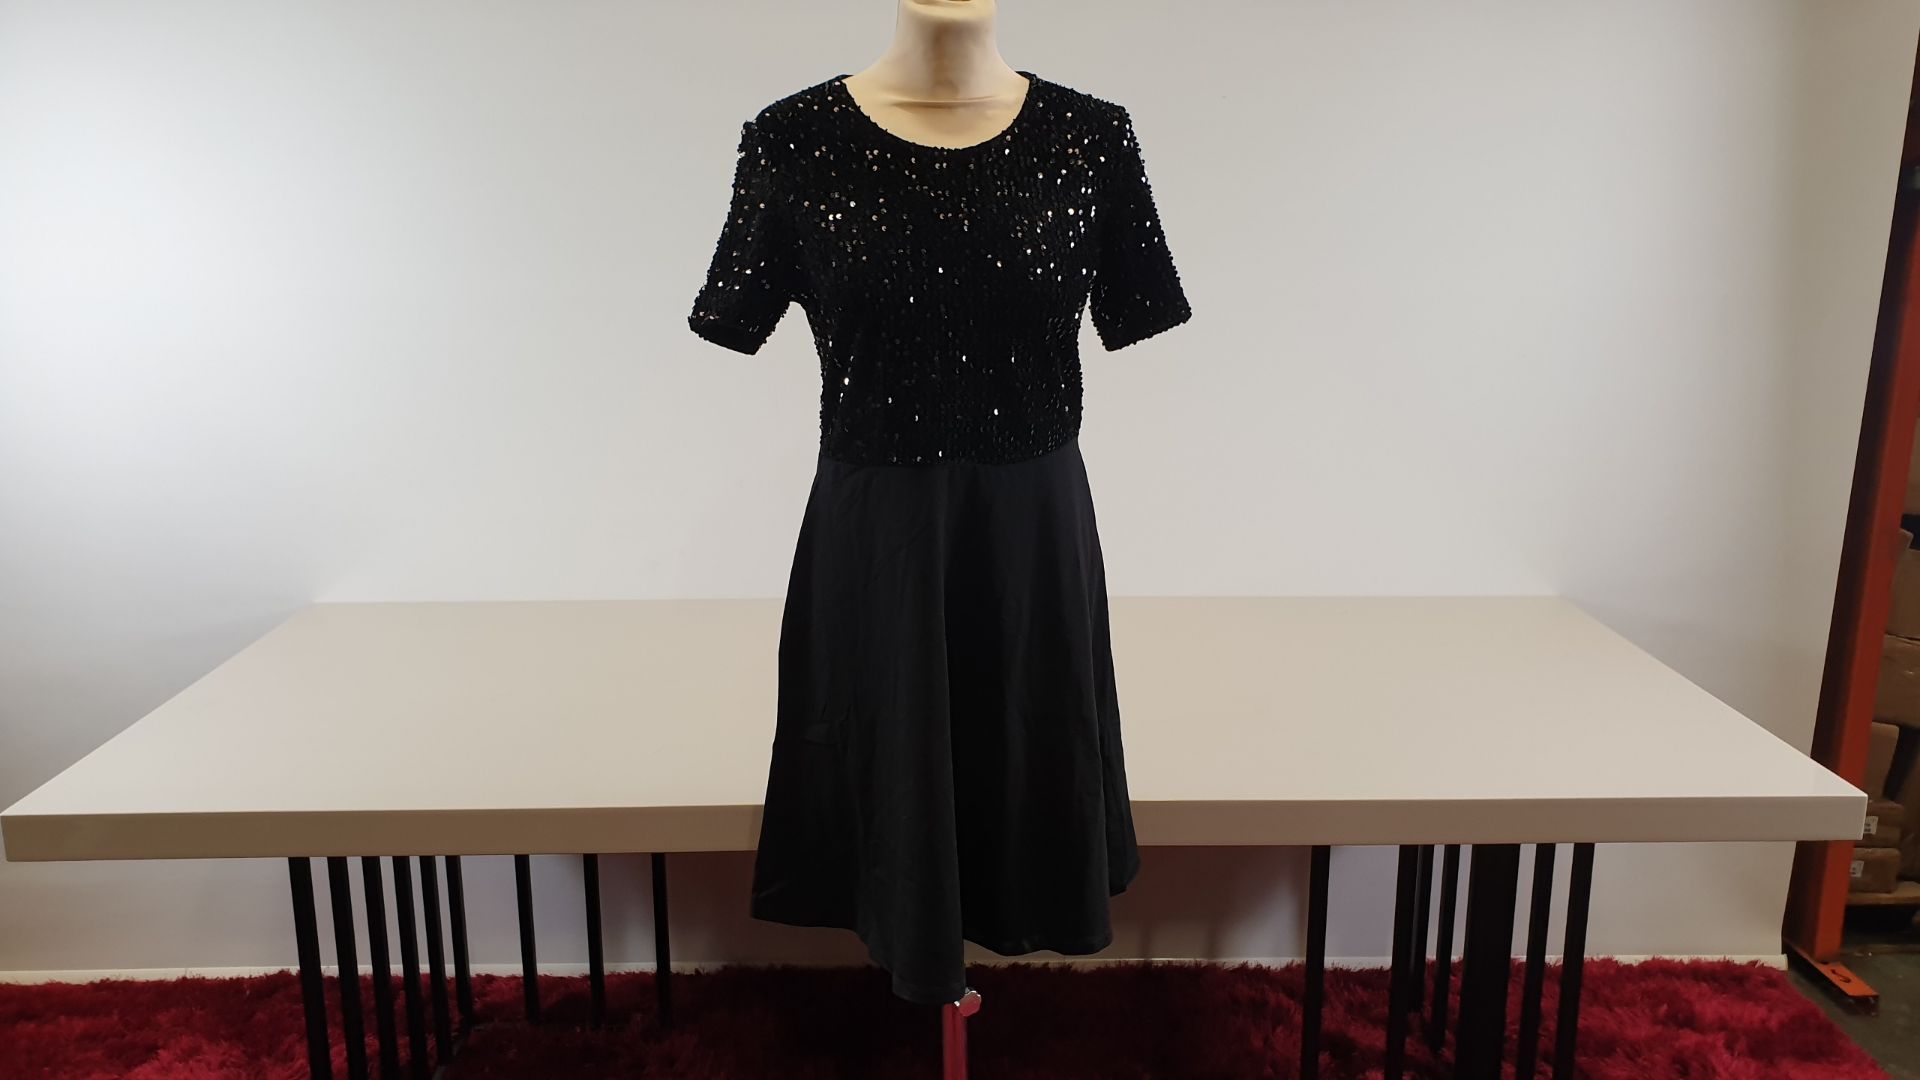 20 X BRAND NEW DOROTHY PERKIN BLACK SEQUINED DRESSES IN SIZE UK 12